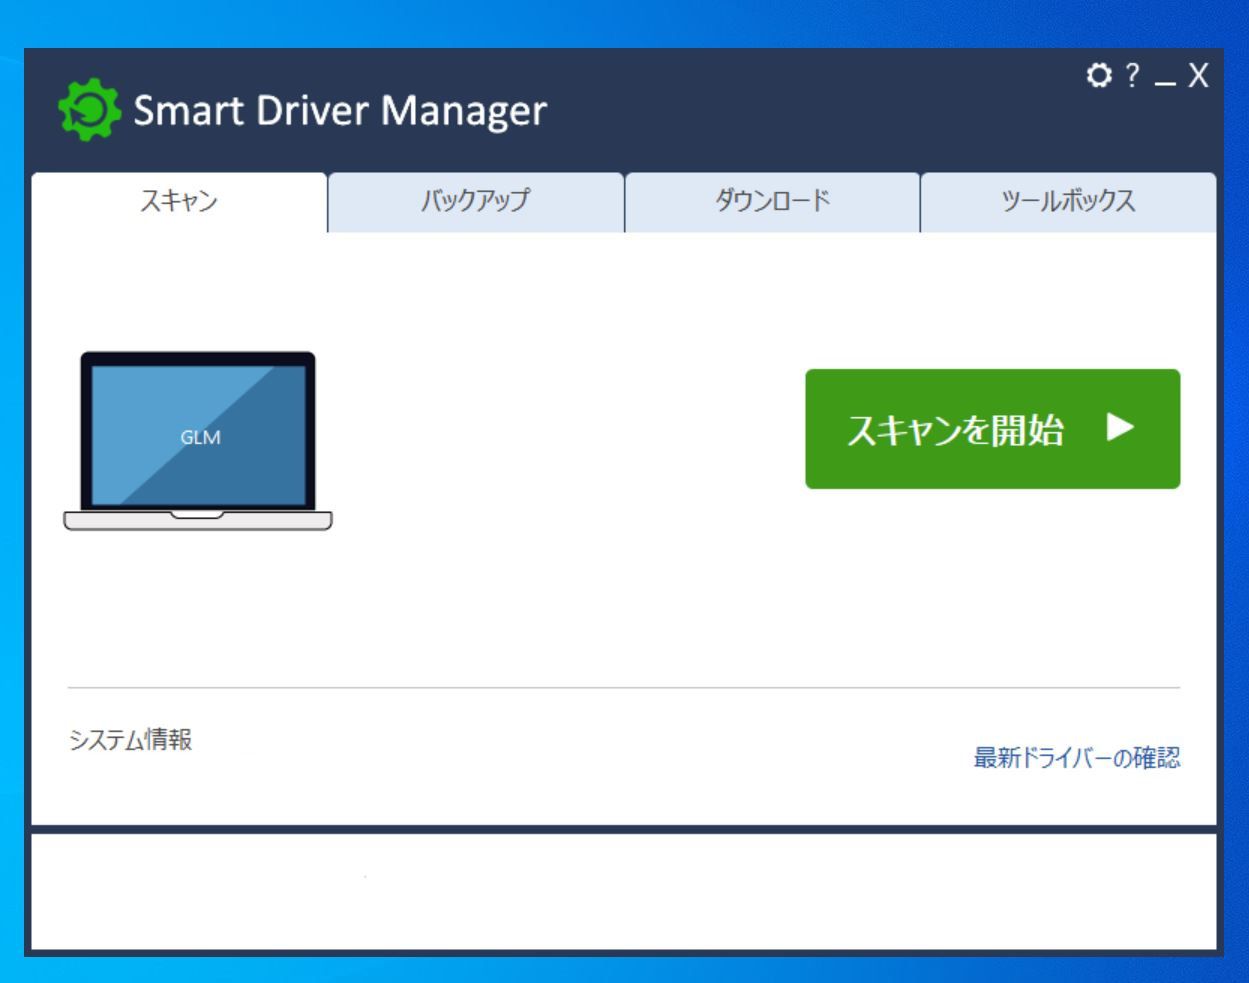 Smart Driver Manager 7.1.1105 instal the last version for iphone